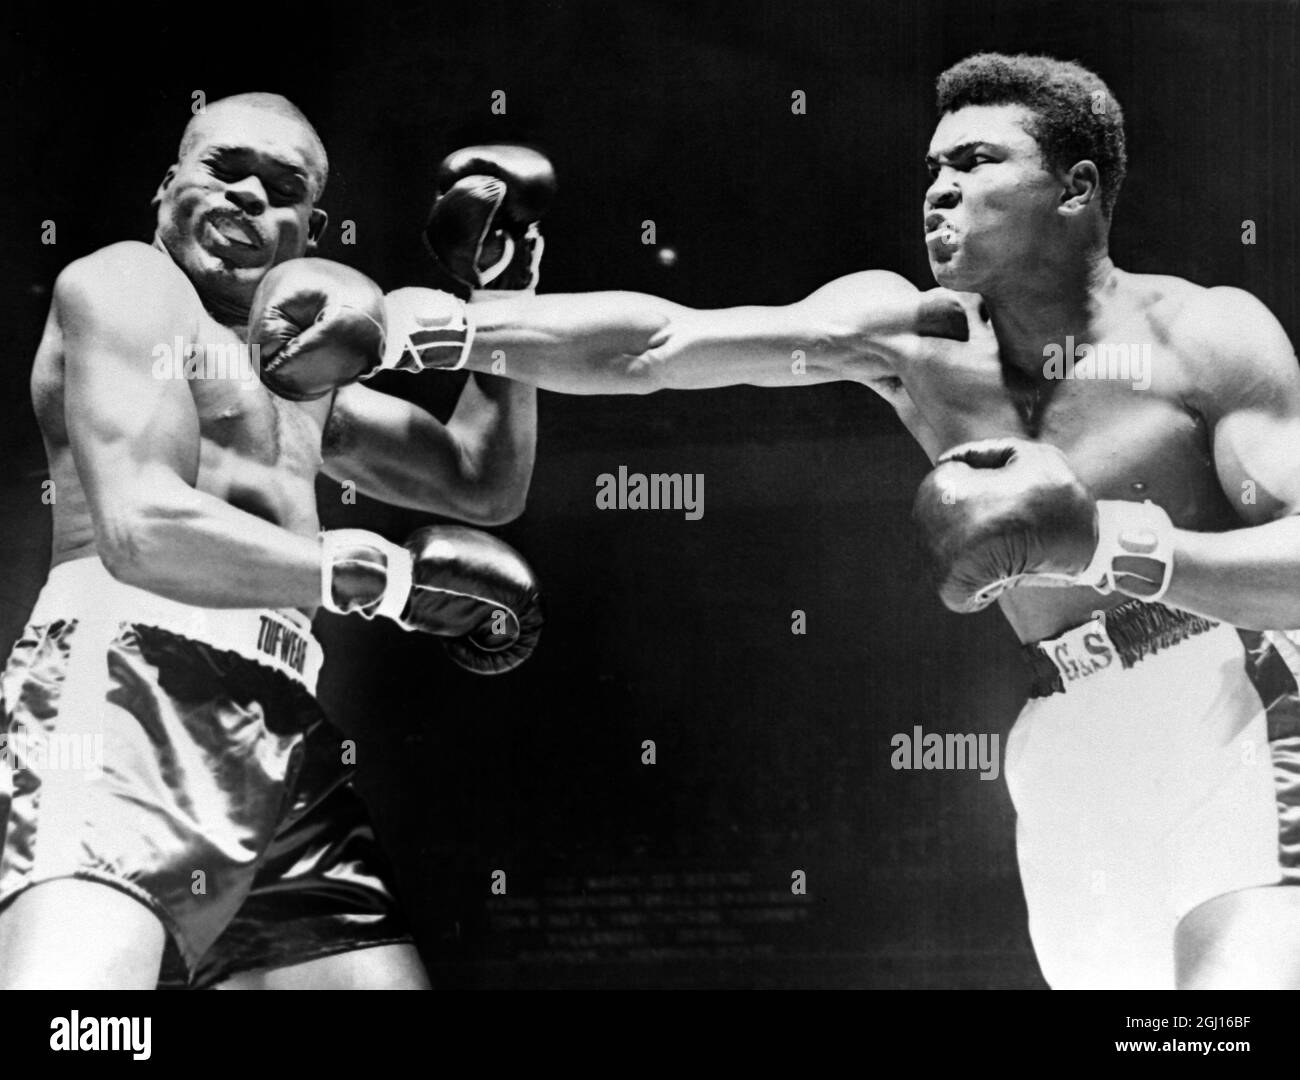 14 MARCH 1963 CASSIUS CLAY CONNECTS A RIGHT PUNCH TO DOUG JONES DURING HIS TEN ROUND POINTS DECISION WIN. CLAY FAILED IN HIS PREDICTED FOURTH ROUND KNOCK OUT AND HIS VICTORY WAS BOOED BY THE CROWD FOR FIVE MINUTES AS THEY THOUGHT JONES WAS BETTER ON THE NIGHT. MADISON SQUARE GARDENS, NEW YORK, USA. Stock Photo